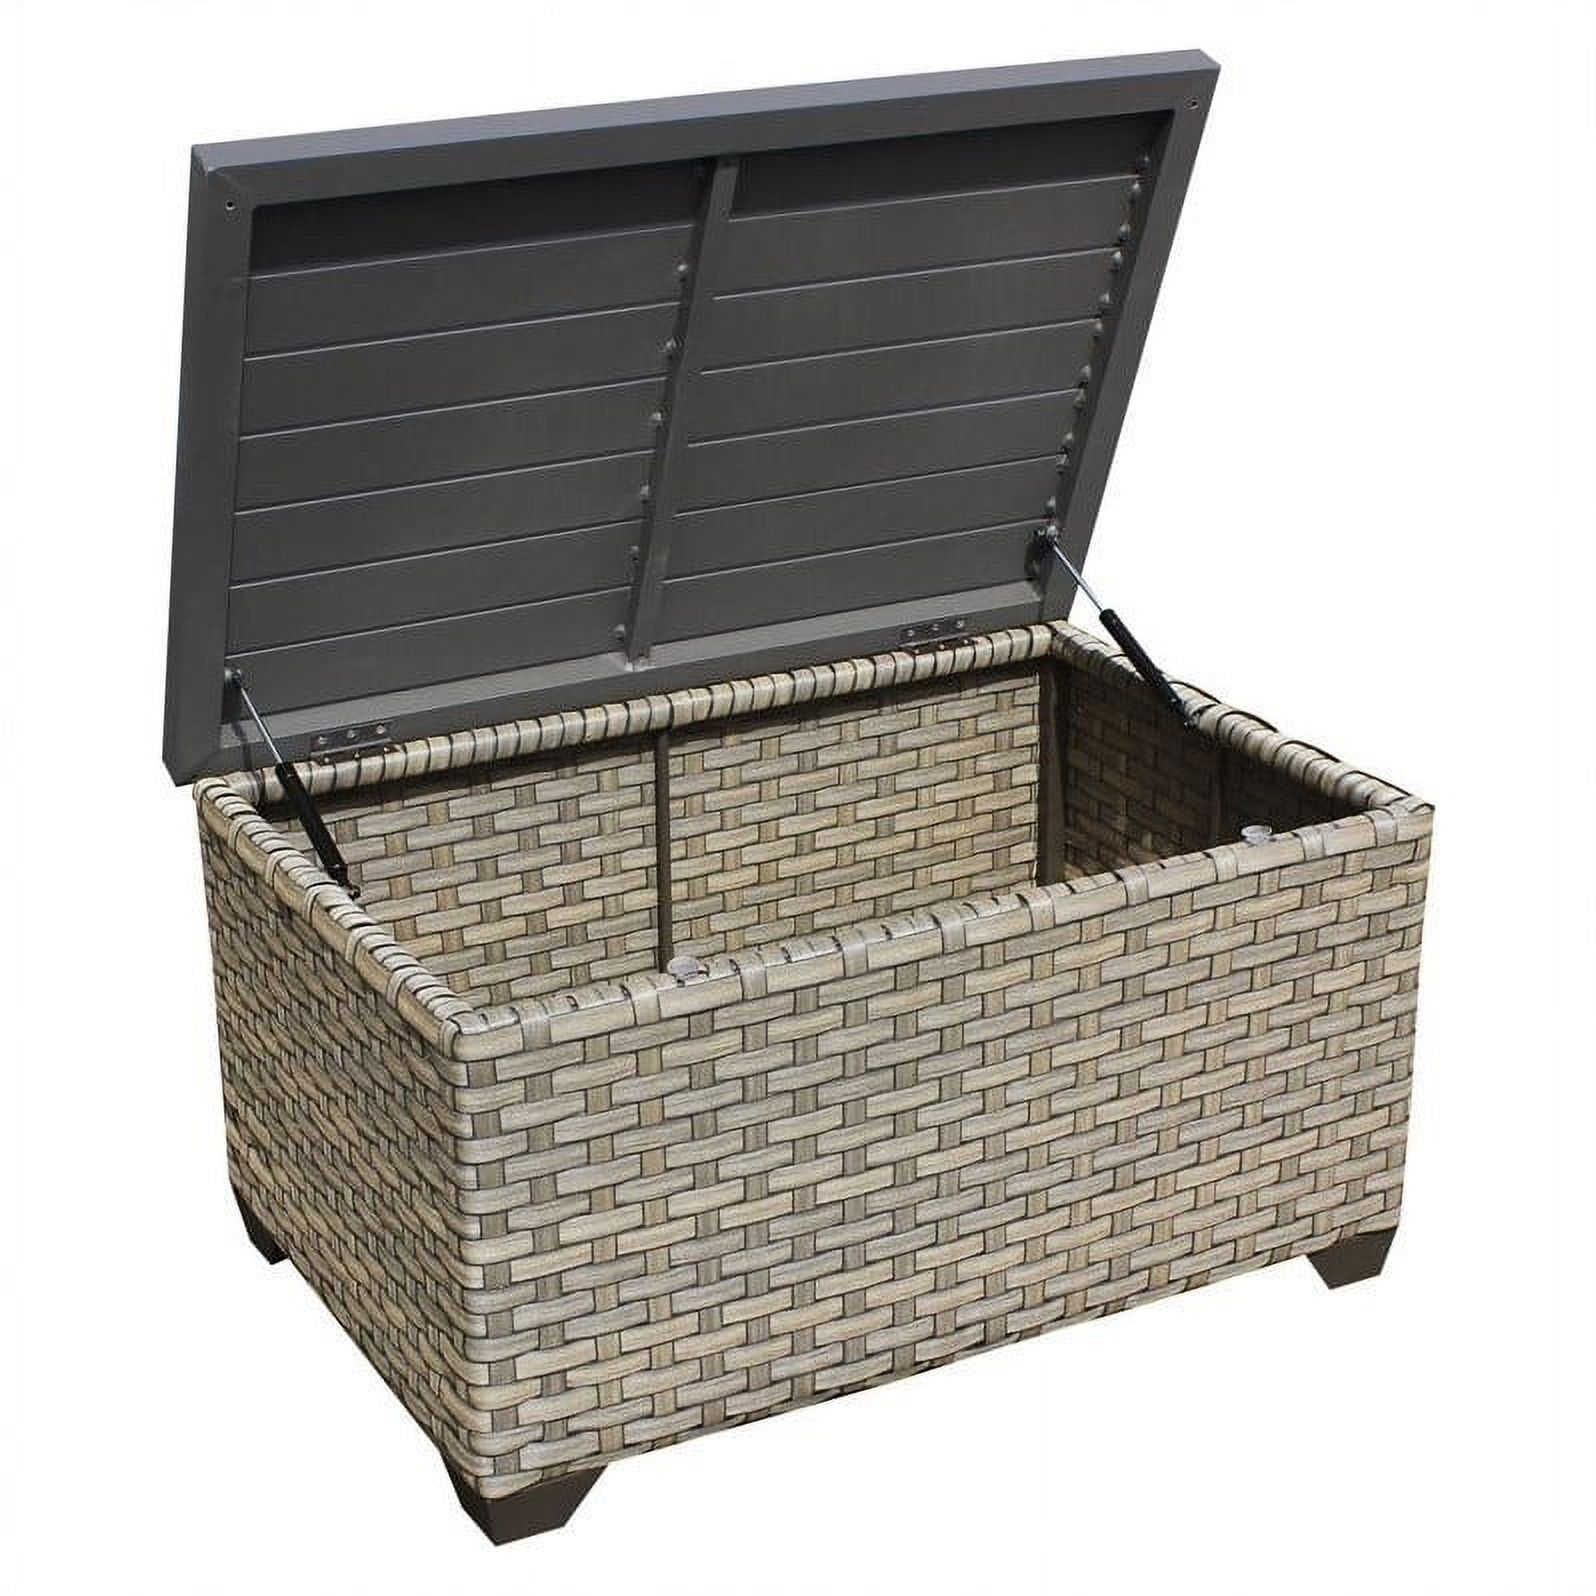 Bowery Hill Outdoor Wicker Storage Coffee Table in Summer Fog - image 3 of 3